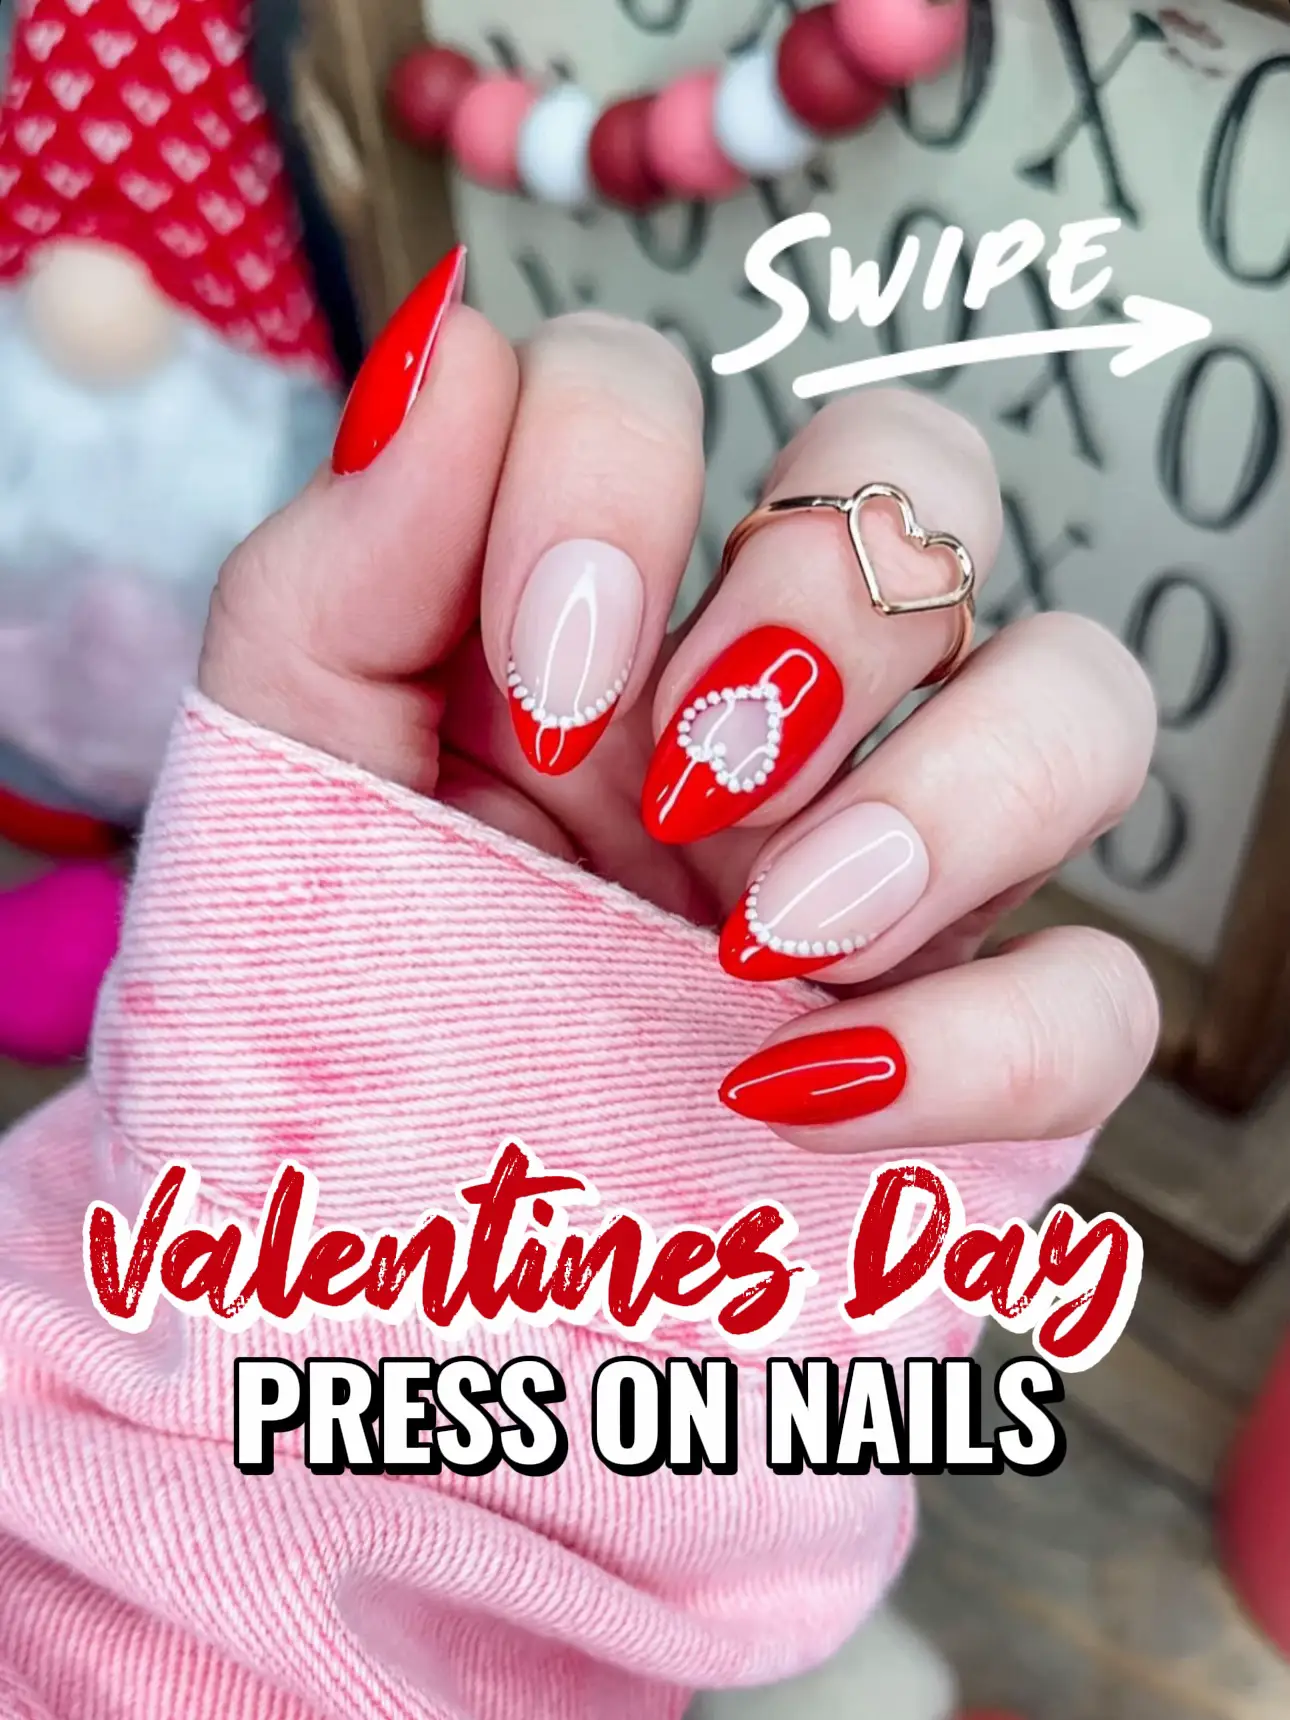 Marlene-press on Nail-luxury Nails-gel X Nails-glue on Nails-party  Nails-handmade Nails-nail Art-french Press Ons 